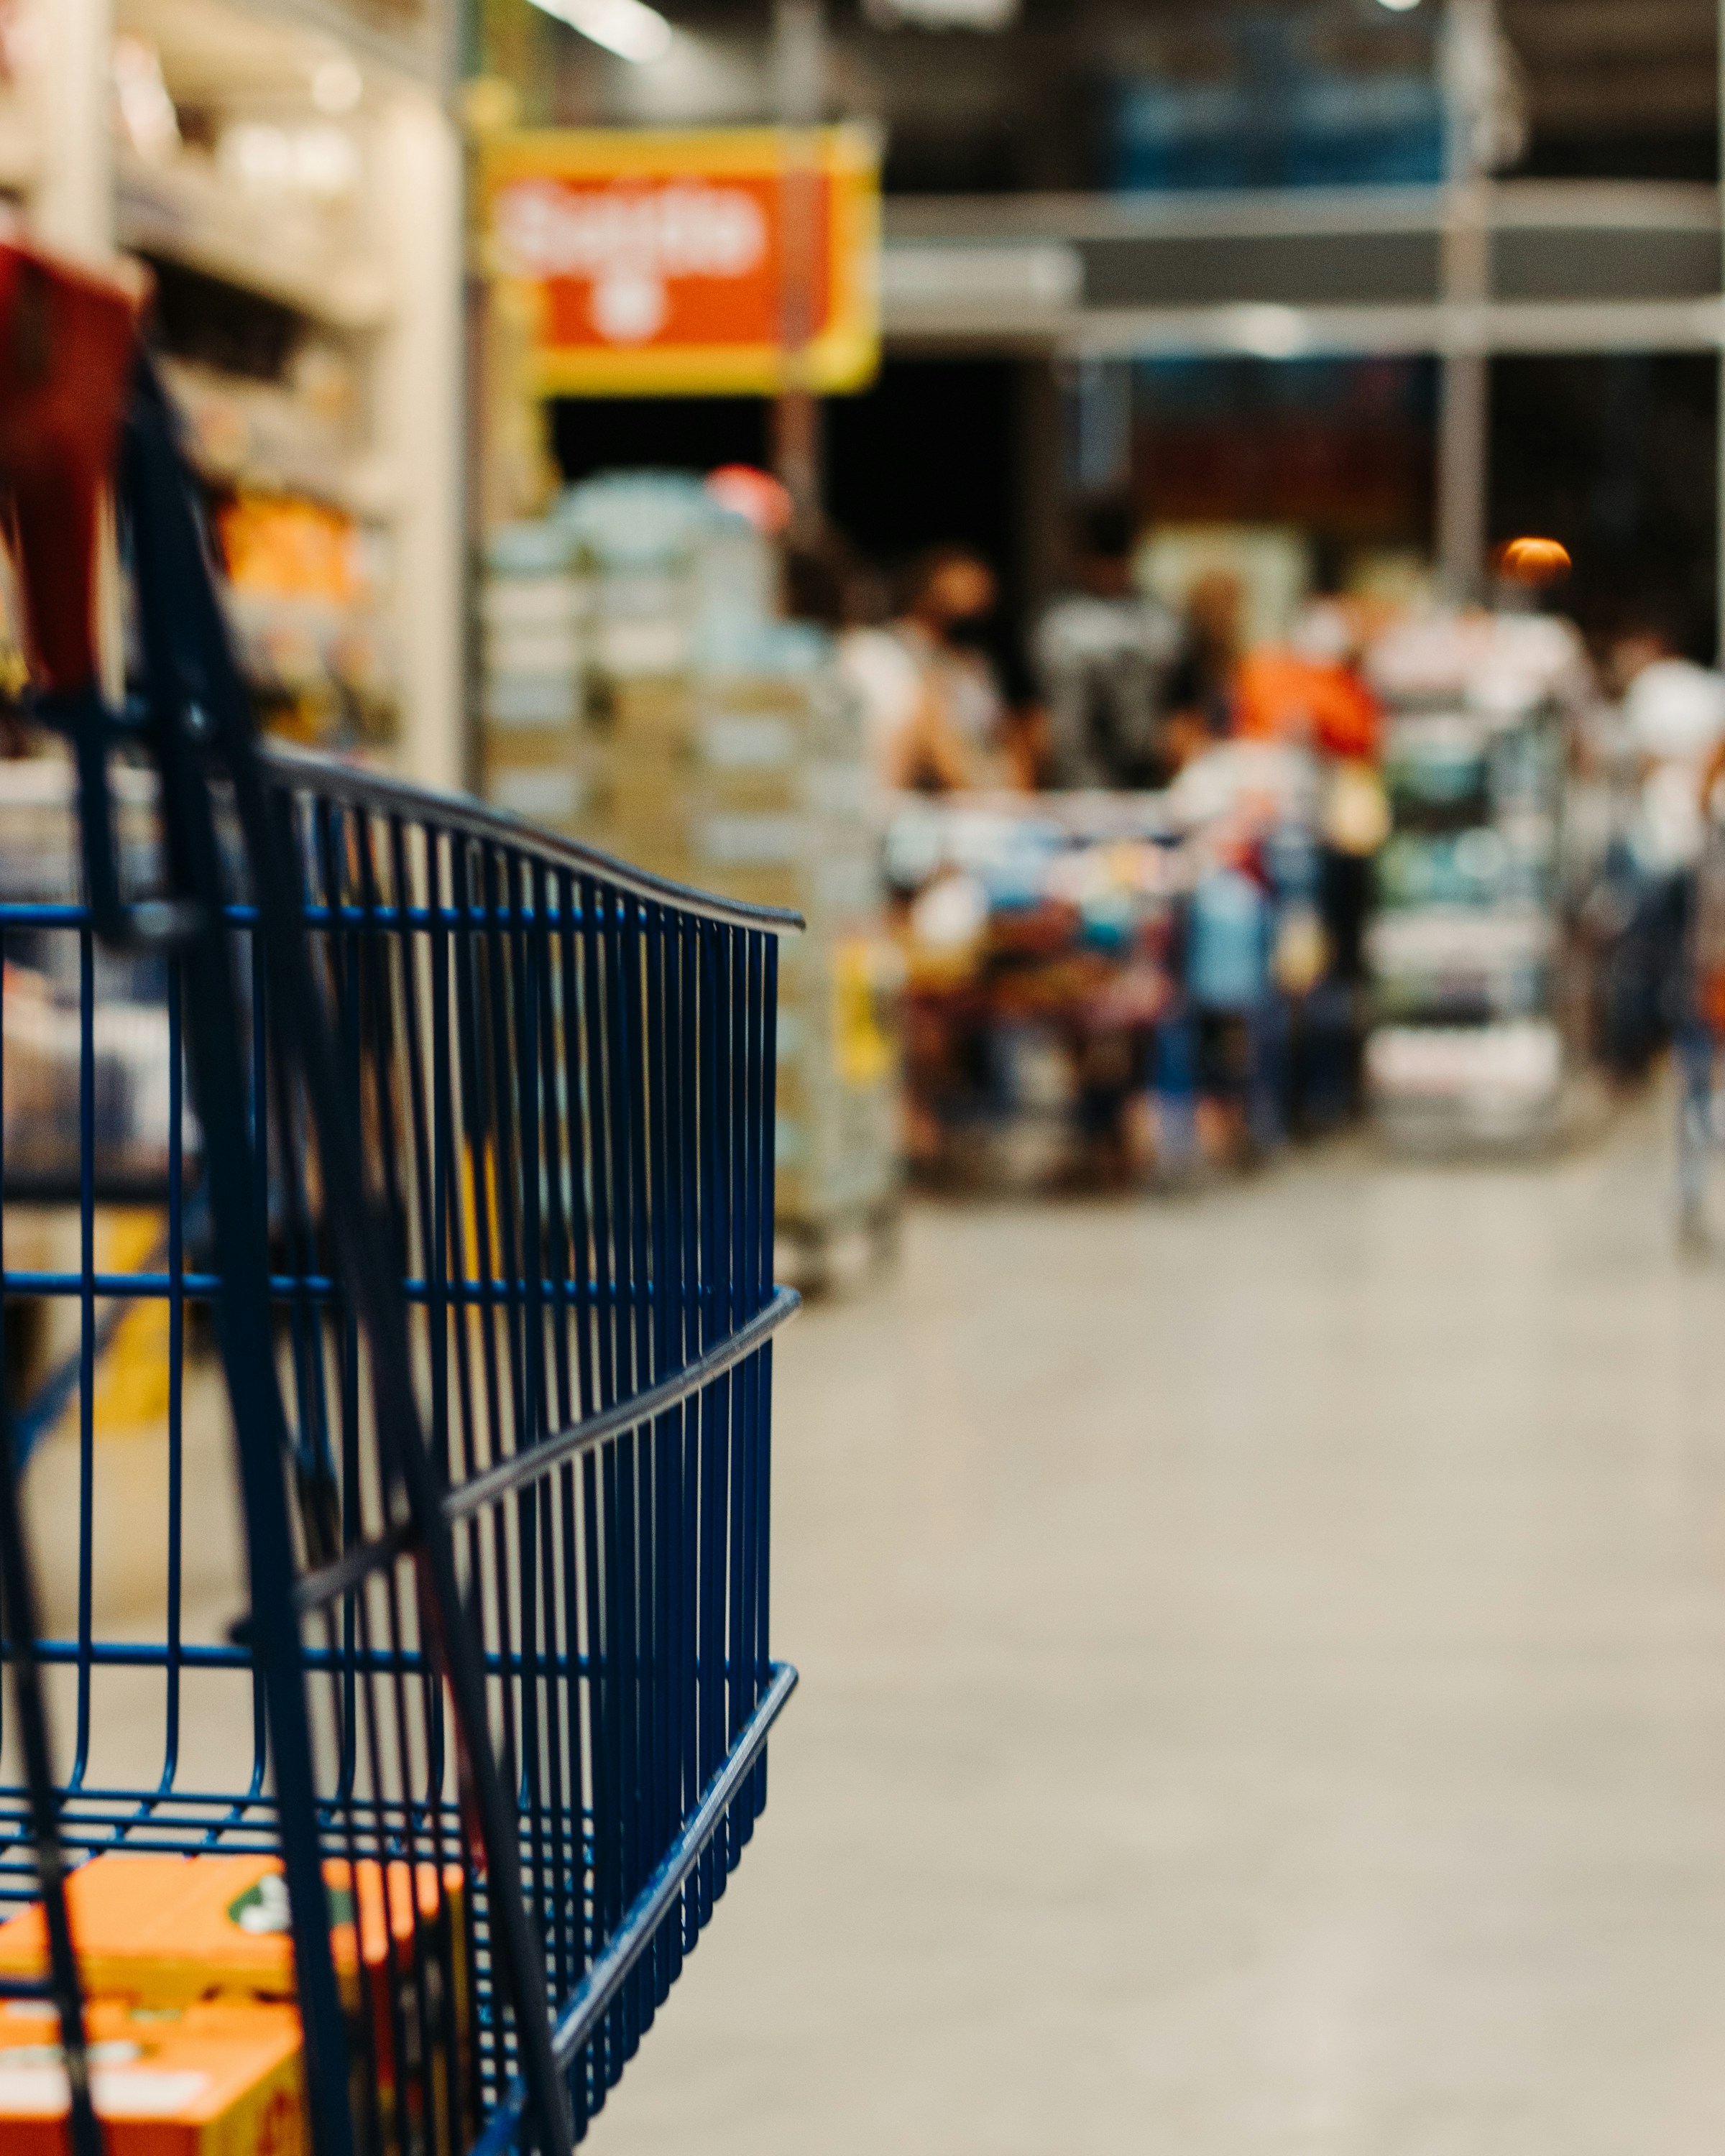 A shopping cart in a grocery store | Source: Unsplash